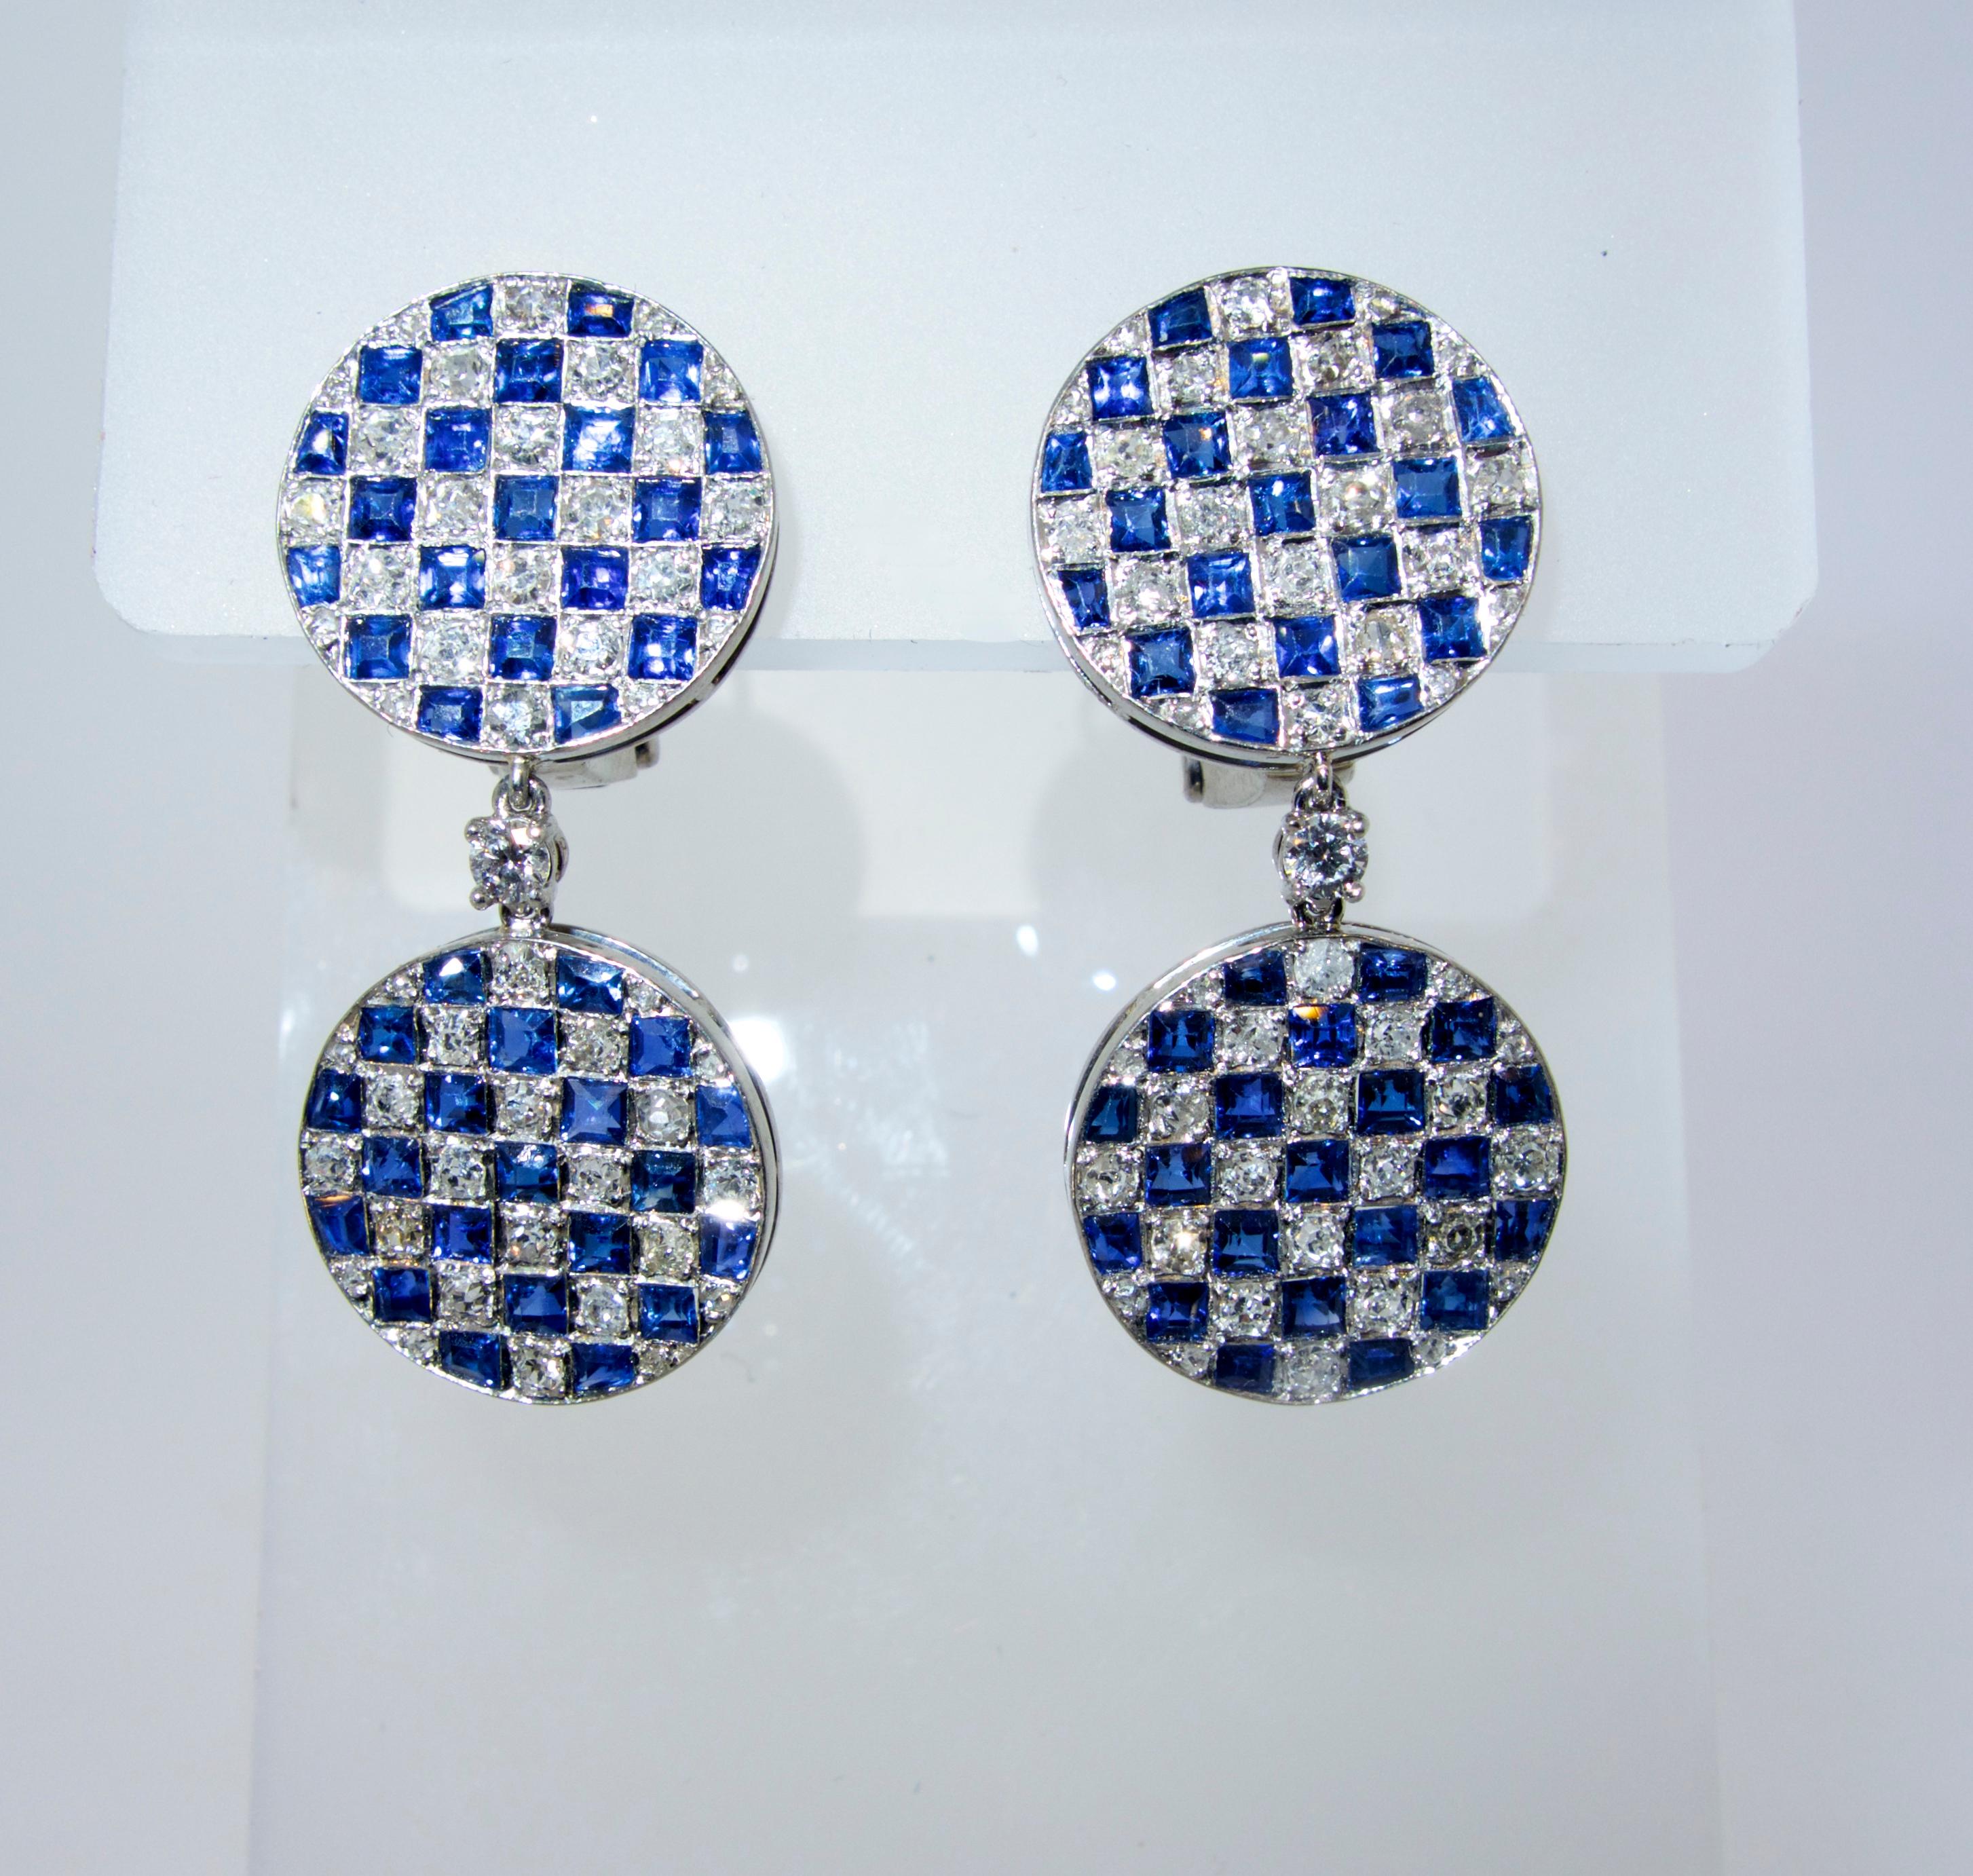 Sapphire, diamond and platinum checkerboard motif earrings, pendant style, which are 1.25 inches long and possessing fine white diamonds and bright blue natural square cut sapphire.  There are 94 round white diamonds weighing approximately 2.65